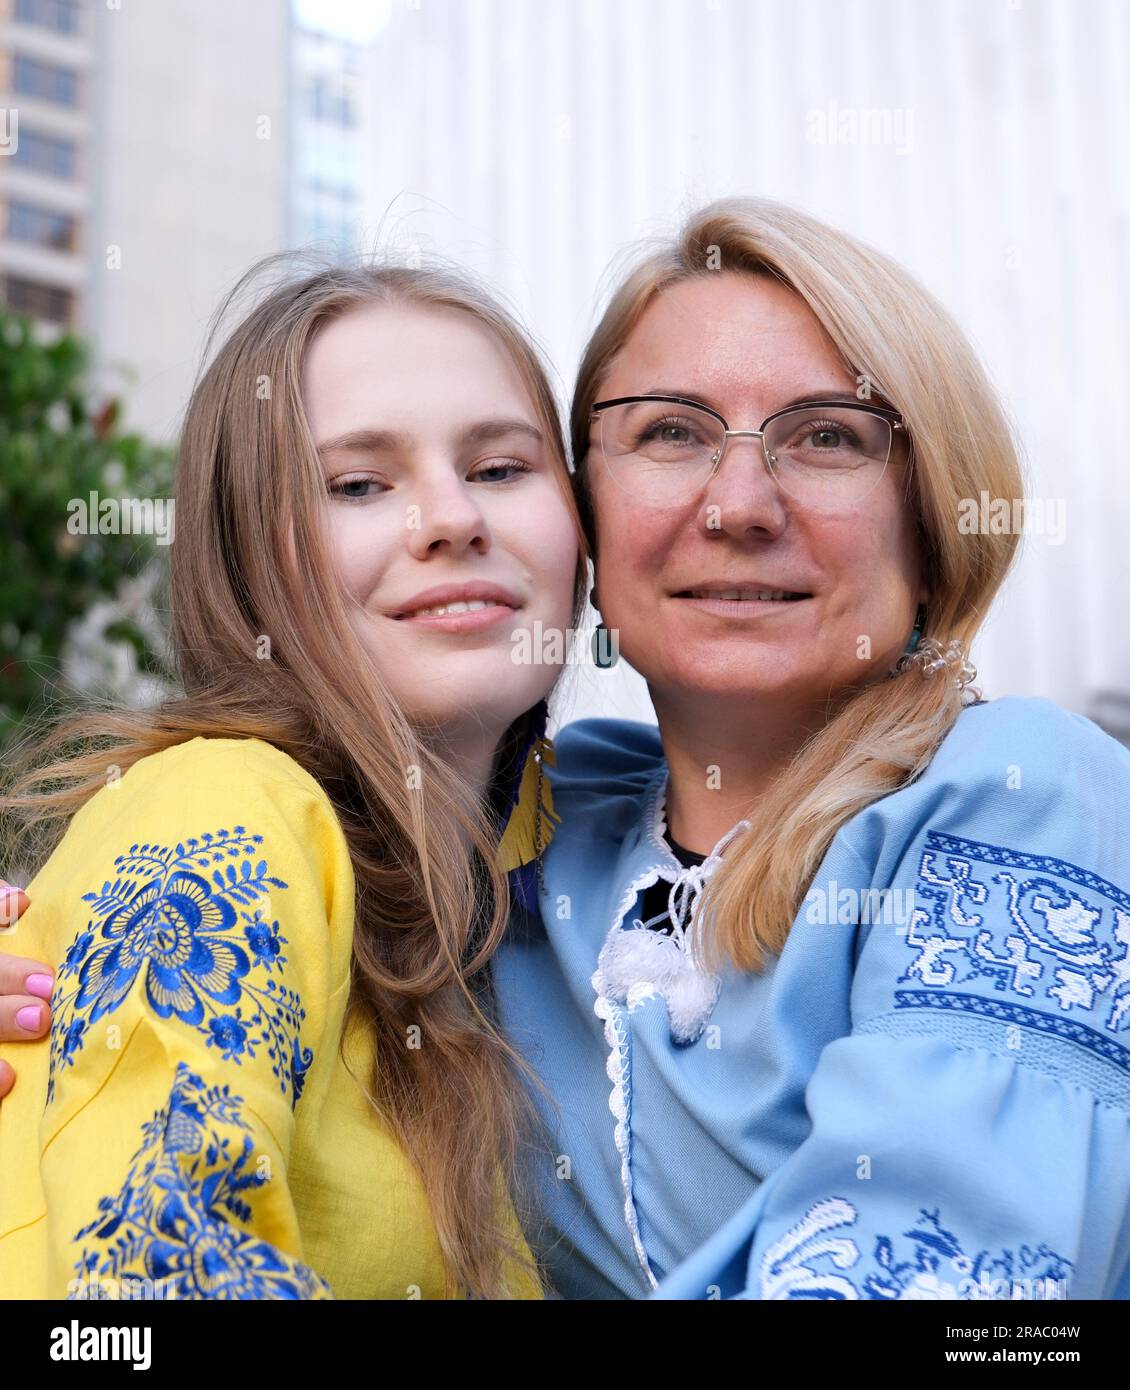 Happy senior woman enjoying in daughter's affection on Mother's day. mother and daughter in embroidered shirts blue and yellow blouse cute family relationship close-up portrait face outdoors Stock Photo